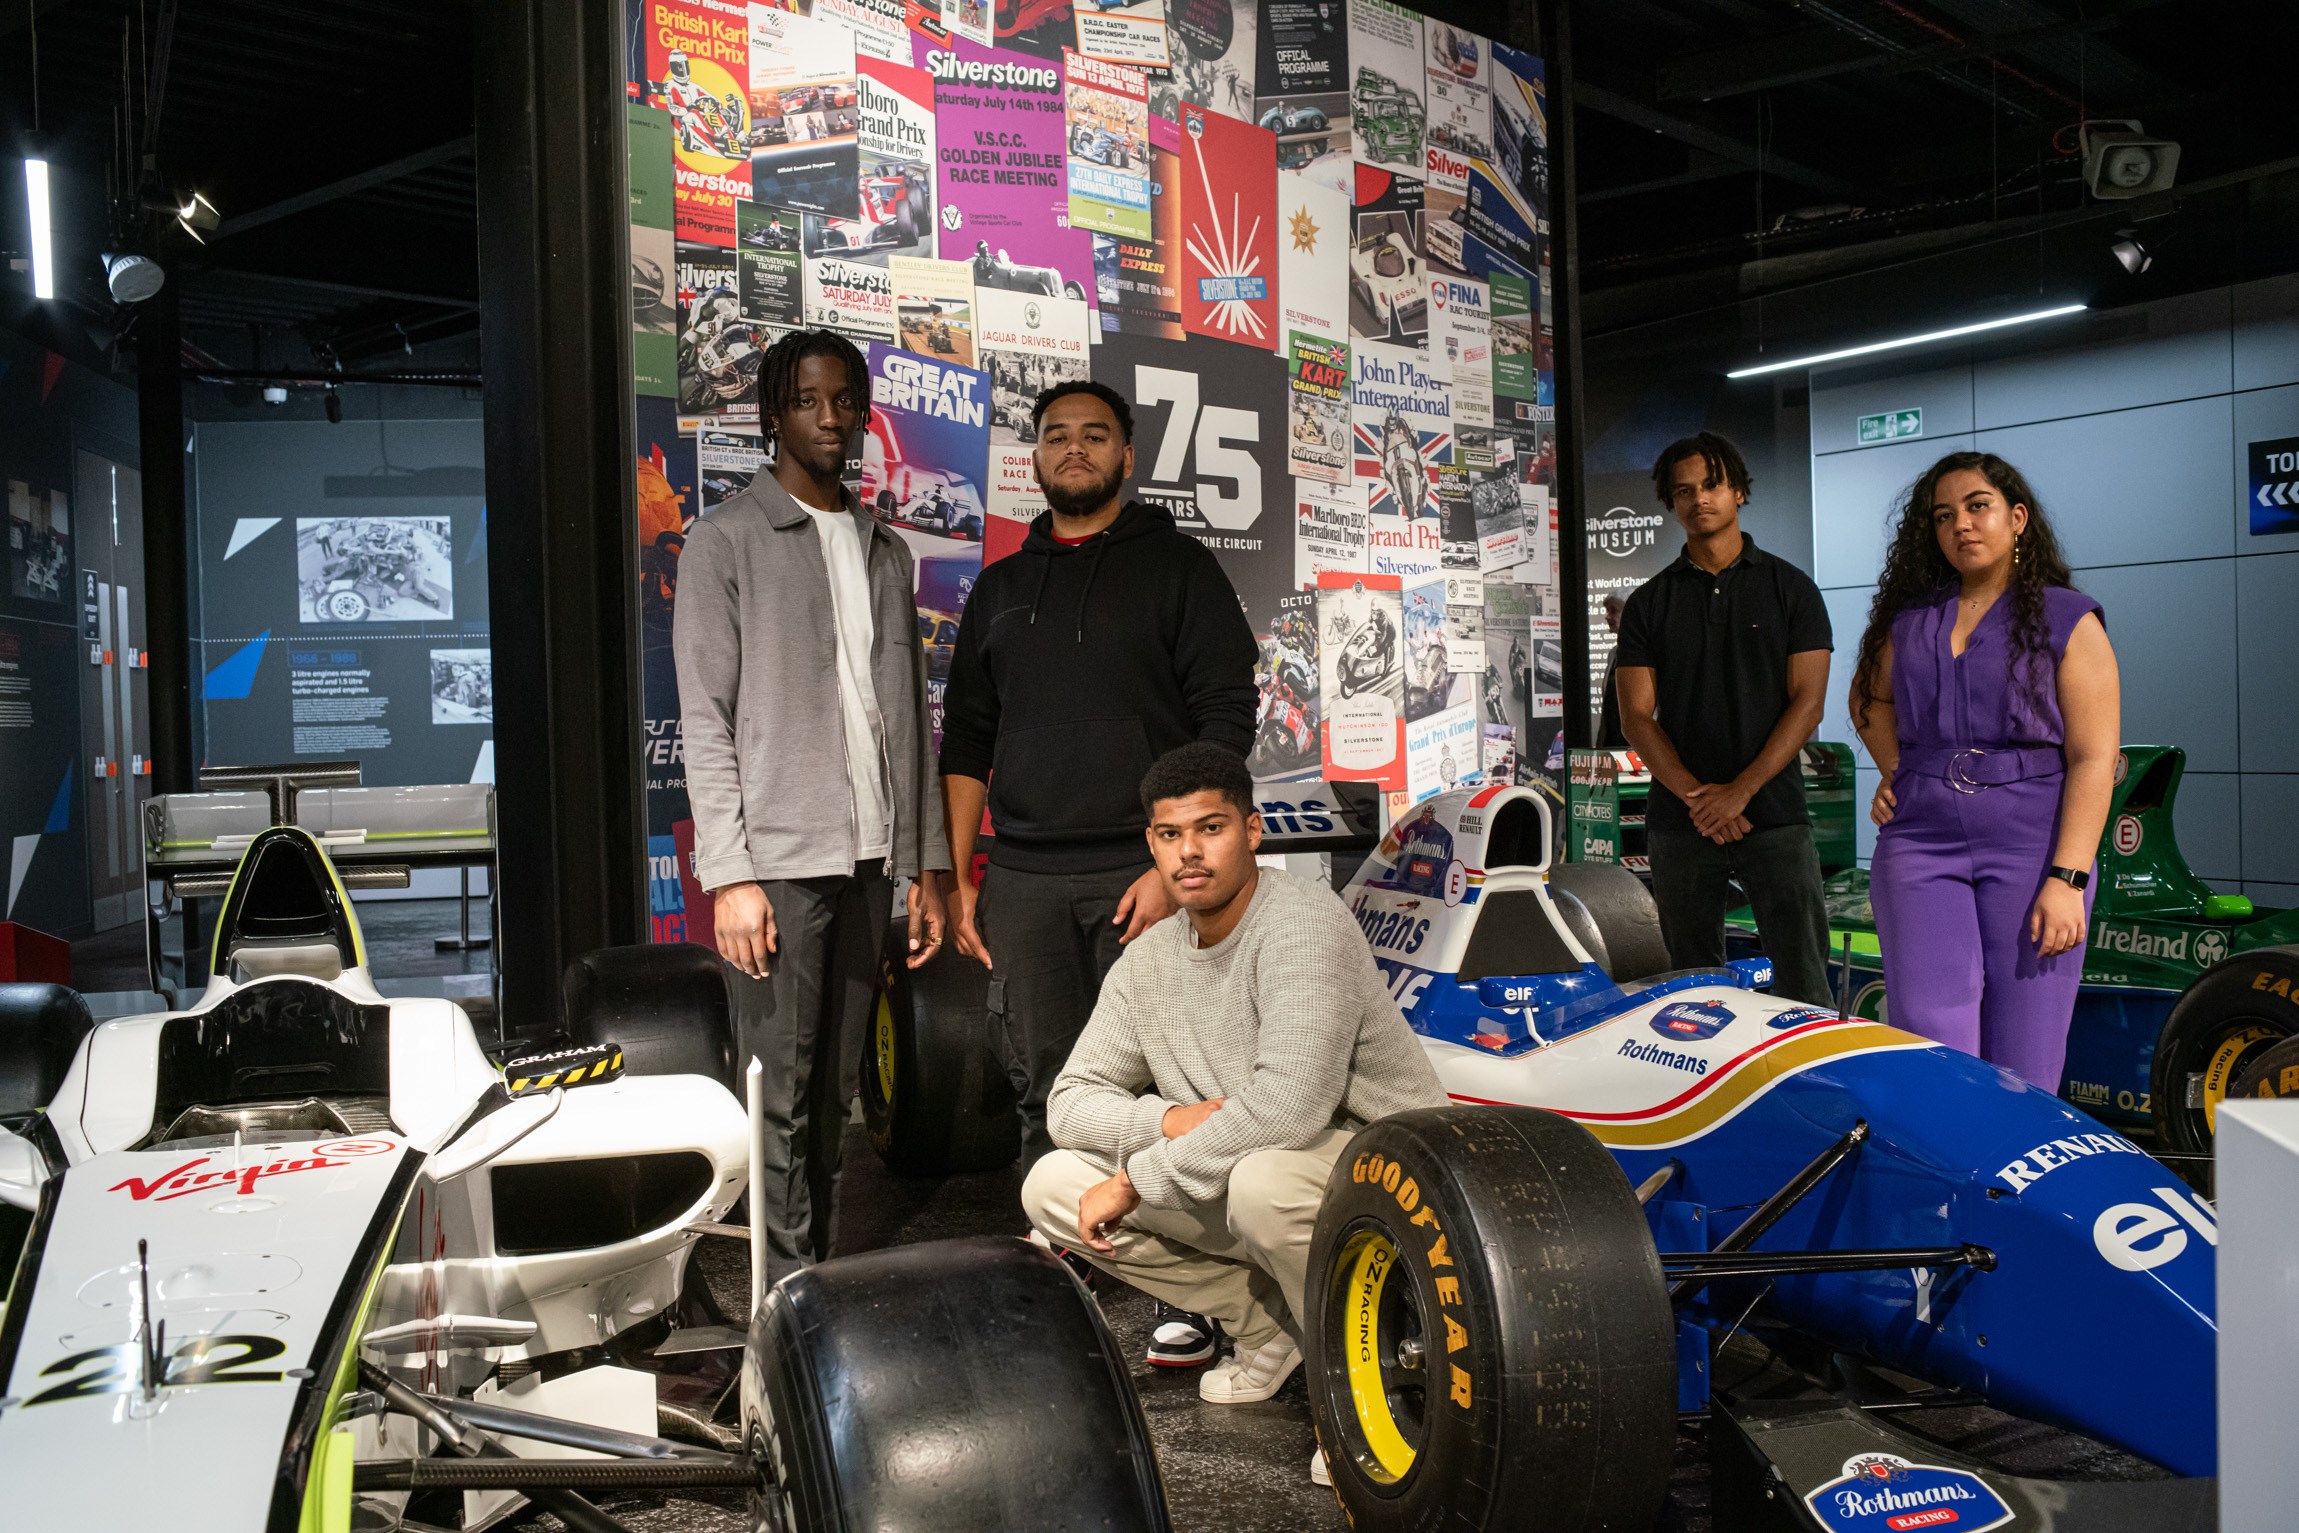 The five motorsport awardees with a racecar